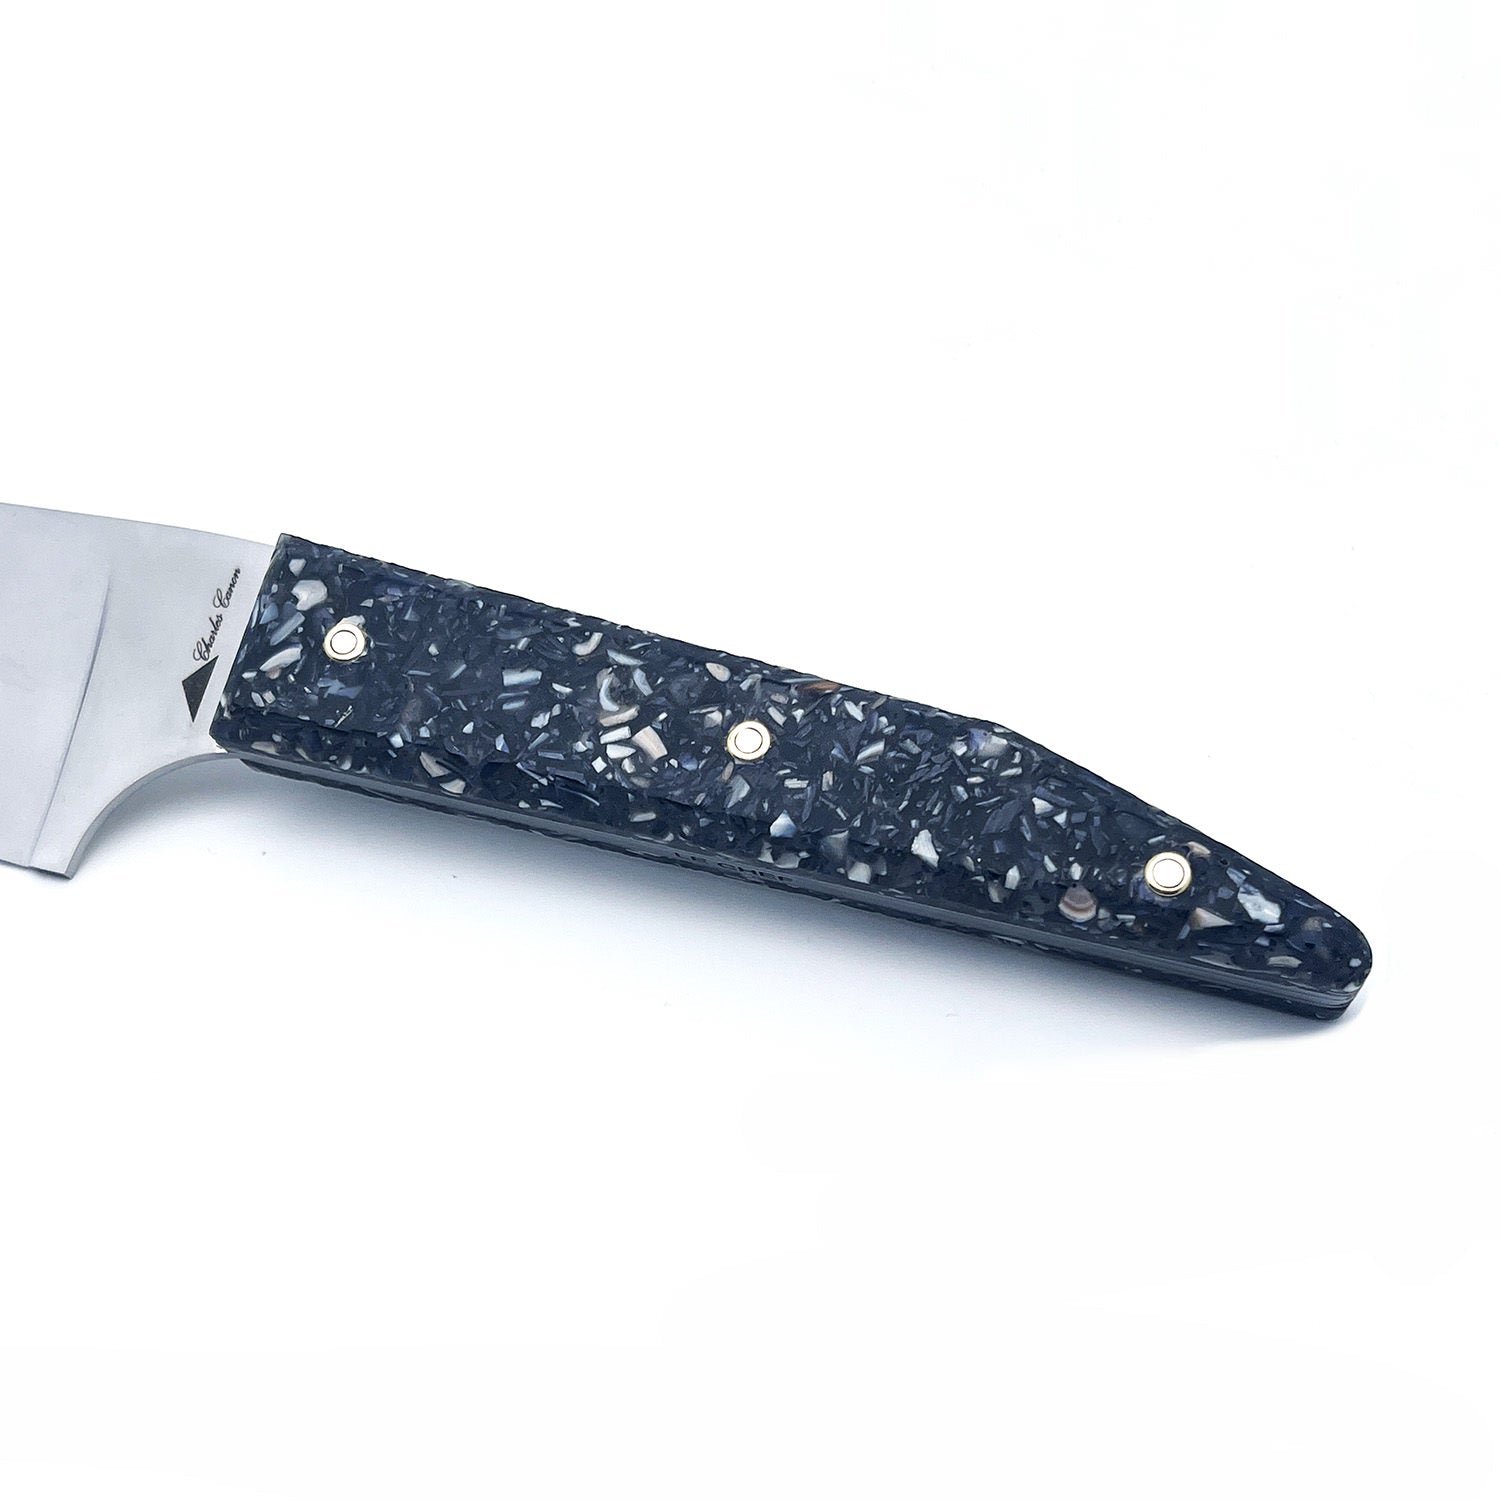 Chef's knife with mussel shell handle